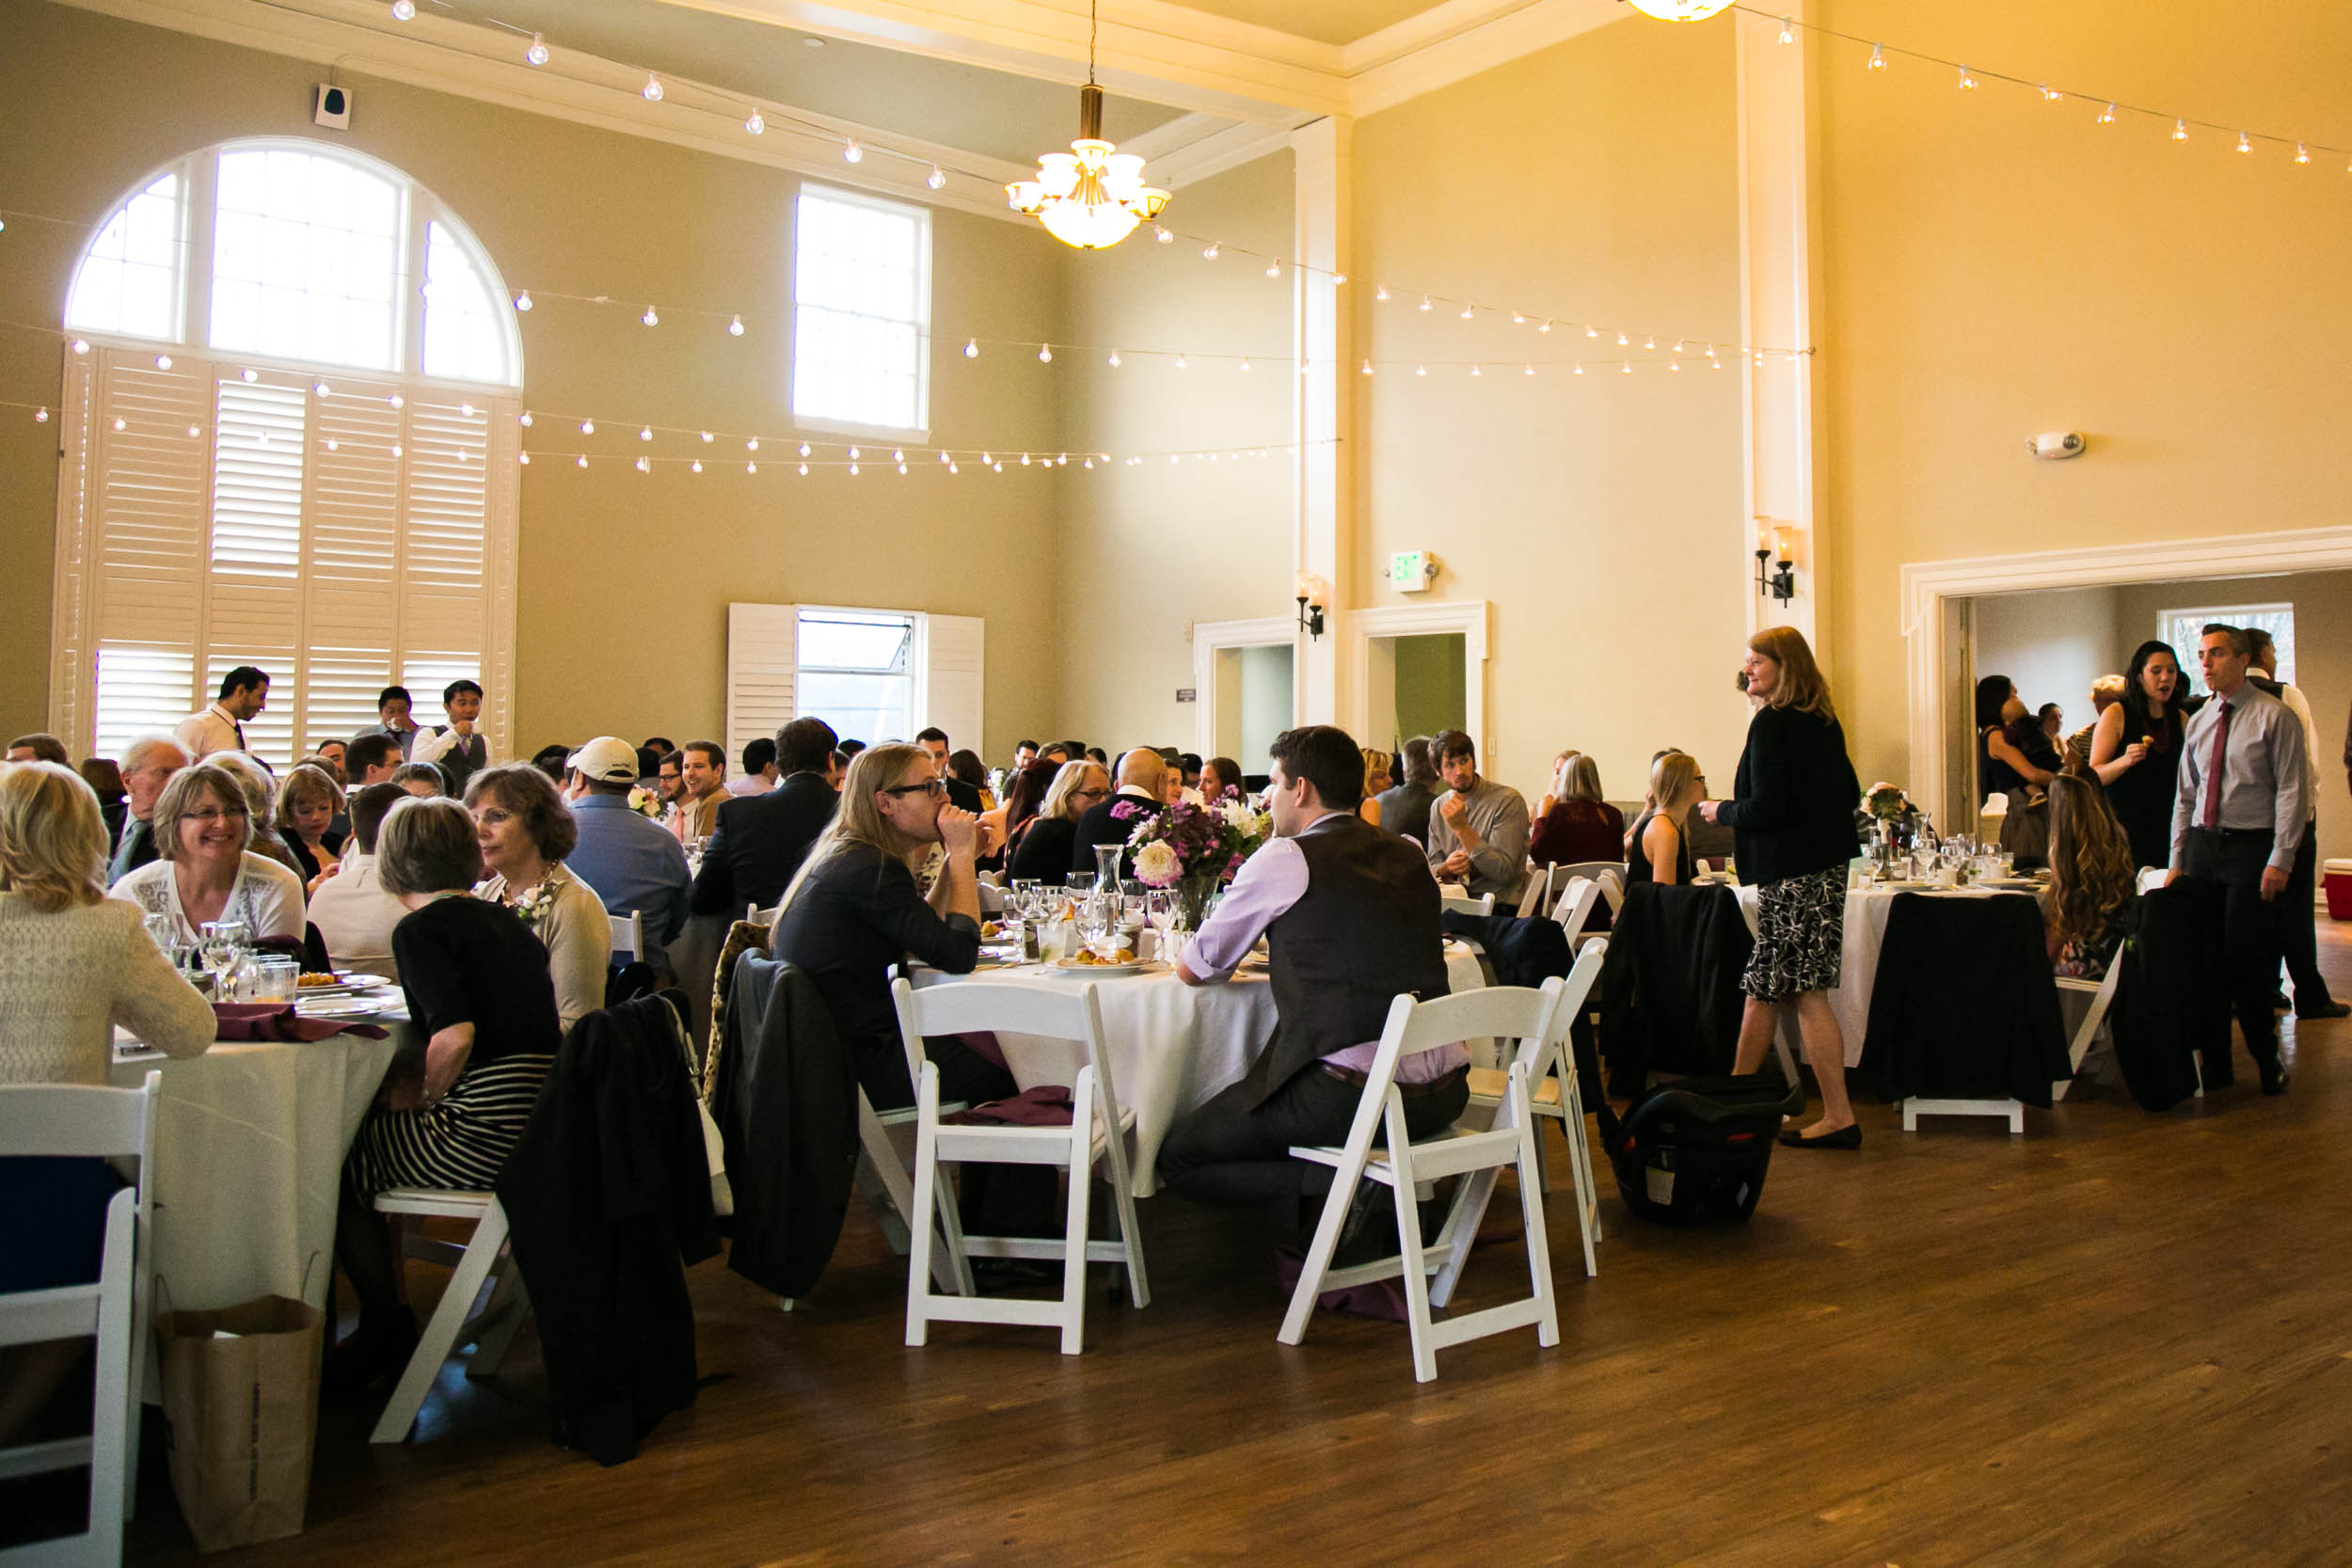 Wedding reception | The Hall at Greenlake Wedding Reception Photo | By G. Lin Photography